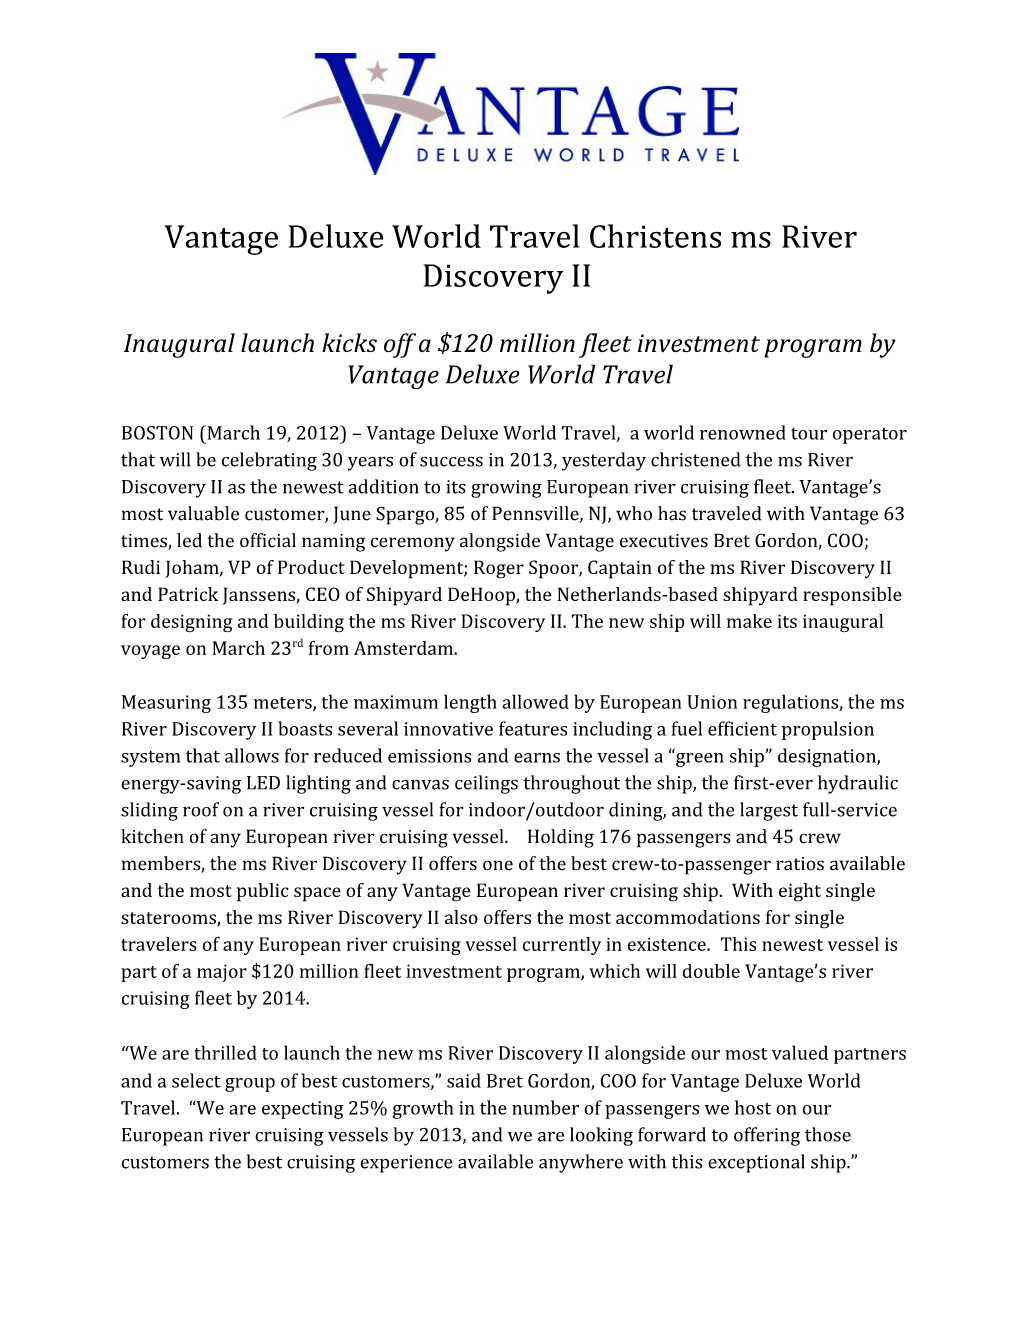 Vantage Deluxe World Travel Christens Ms River Discovery II